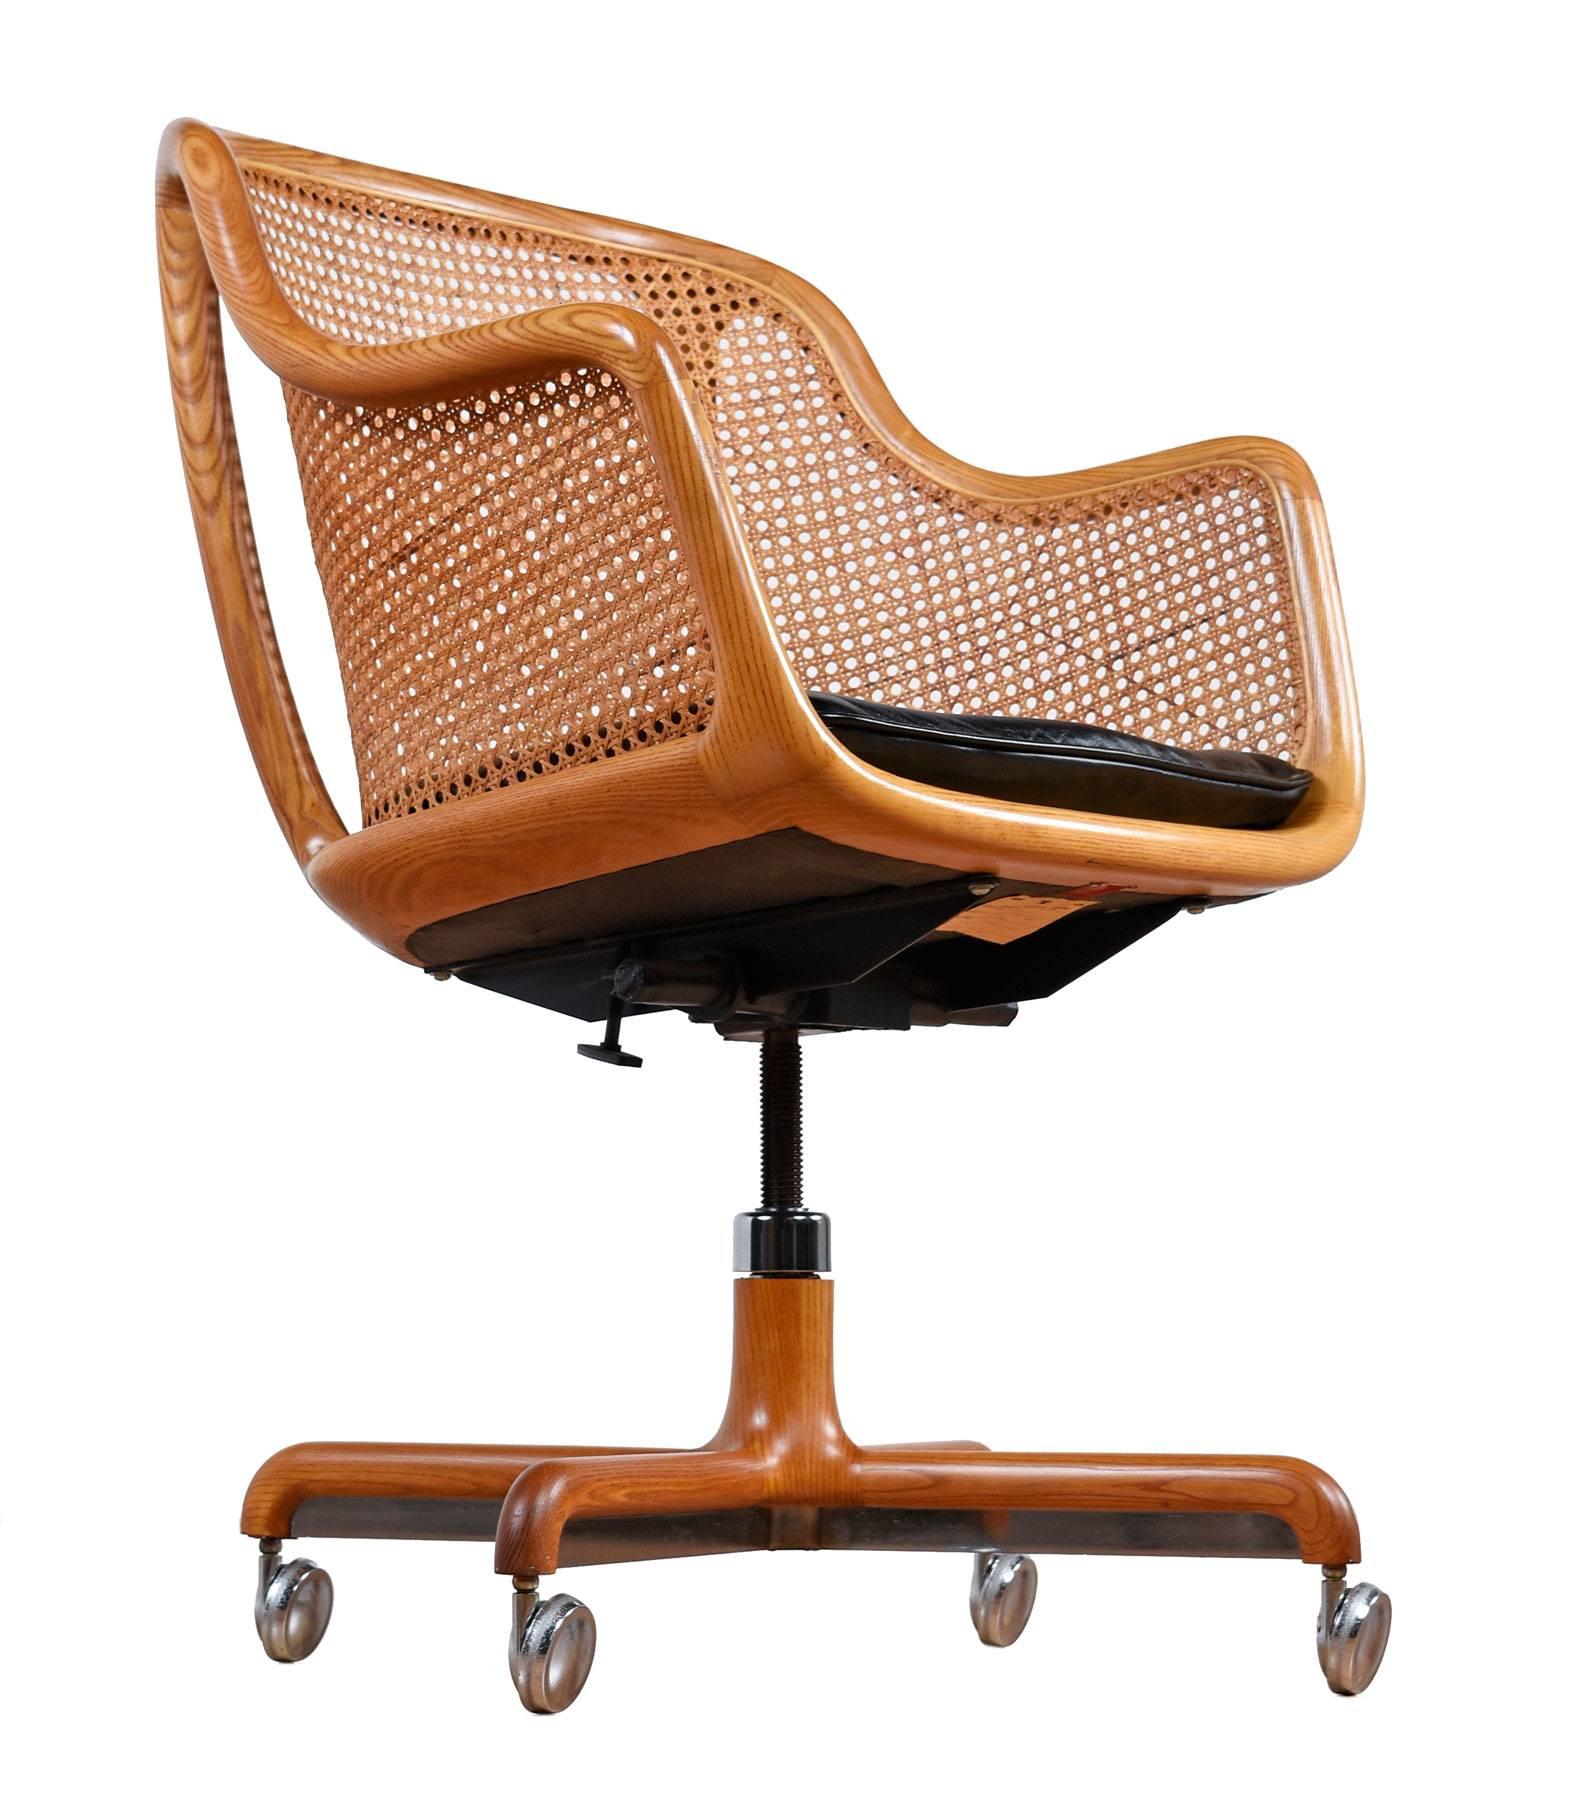 Gorgeous Mid-Century Modern cane desk chair by Ward Bennett for Brickel Associates. Made of ashwood, featuring a curved cane back and the original black leather seat. The chair is on wheels, the base tilts, swivels, and has a tension knob.

Arm